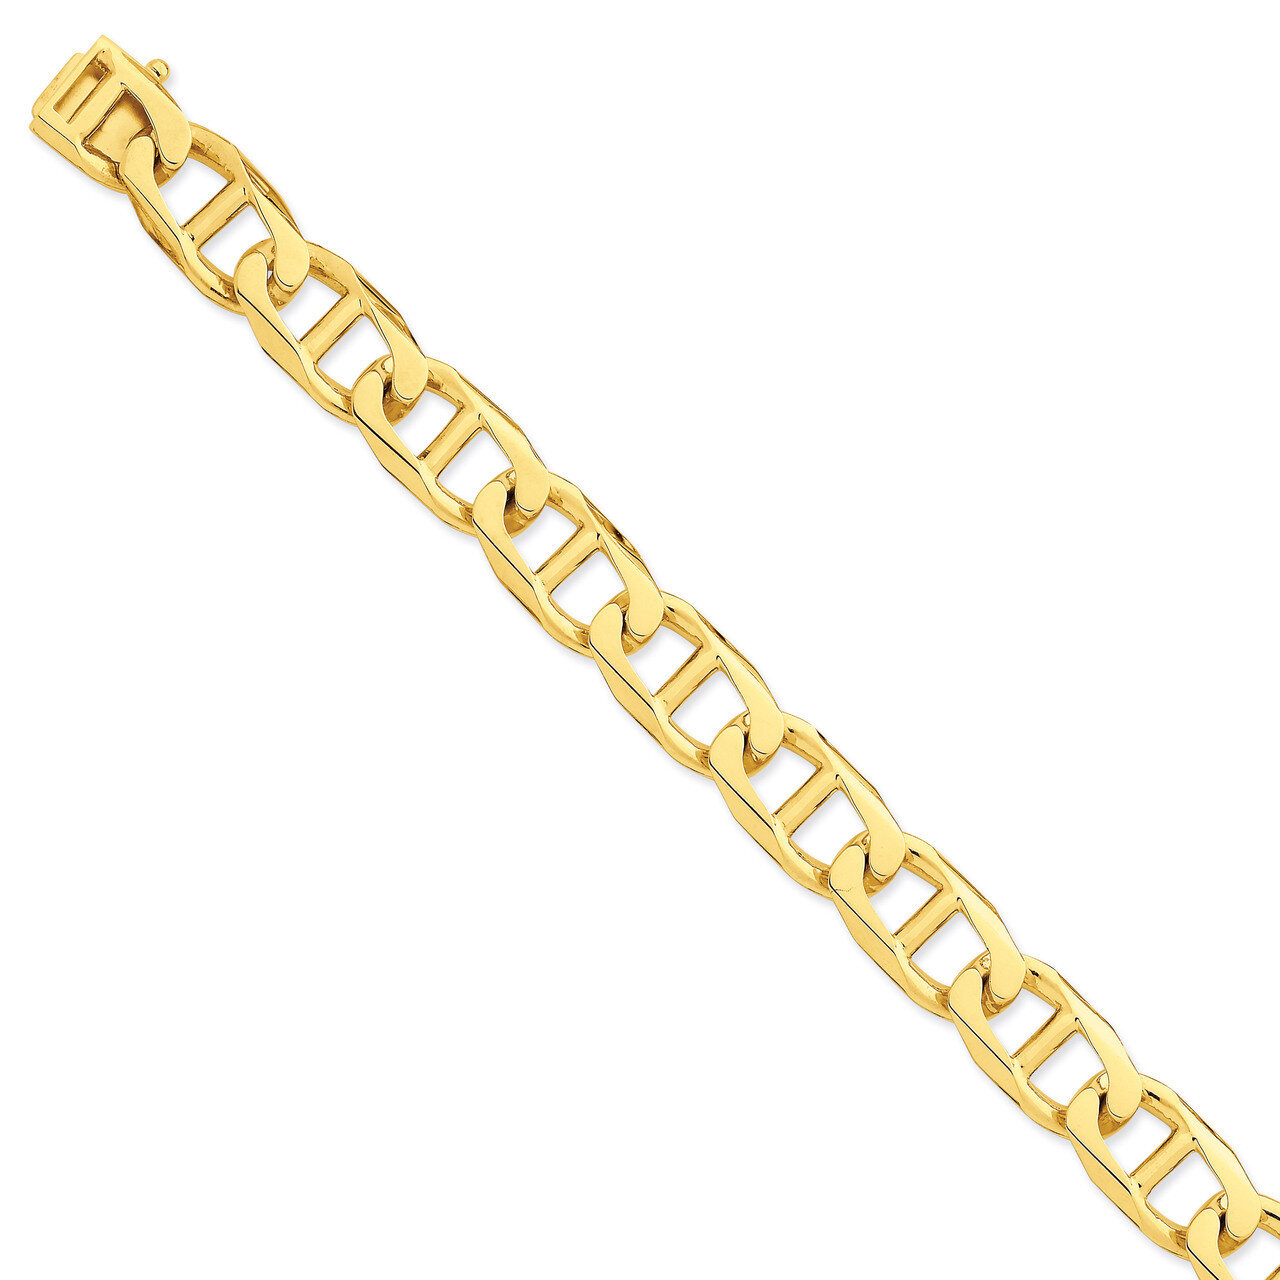 13mm Hand-Polished Anchor Link Chain 22 Inch 14k Gold LK103-22